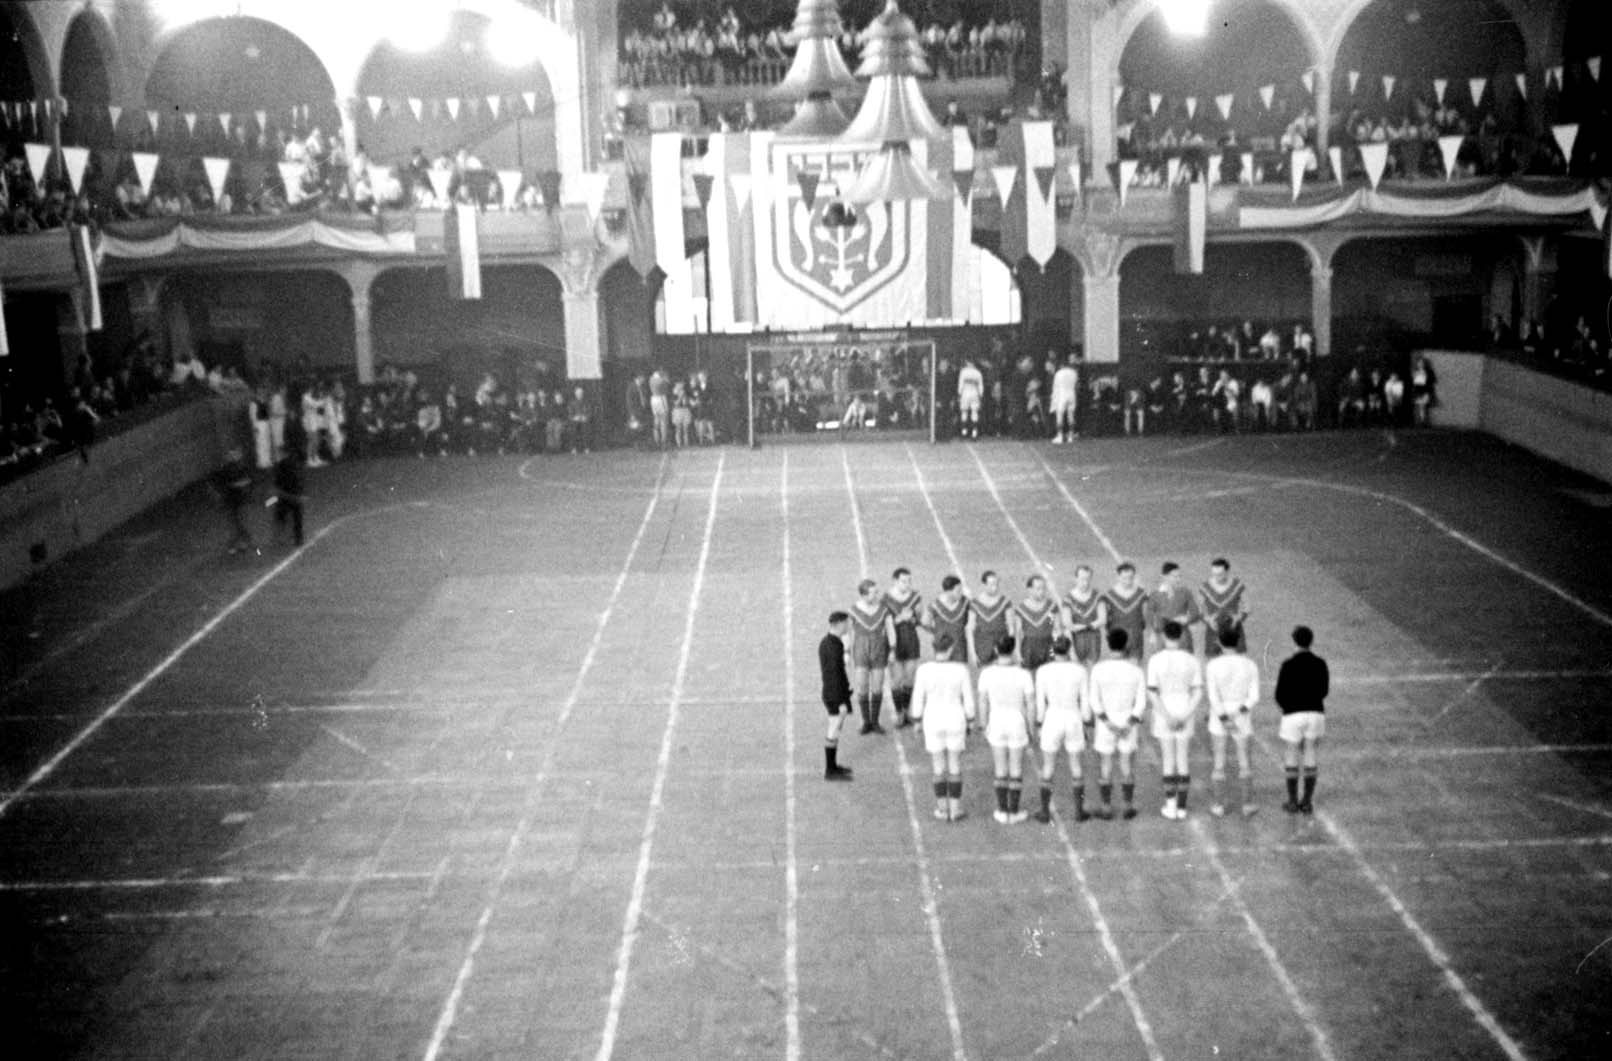 Berlin, Germany, a handball game that took place as part of the Maccabi sport association events in Germany, November-December 1936